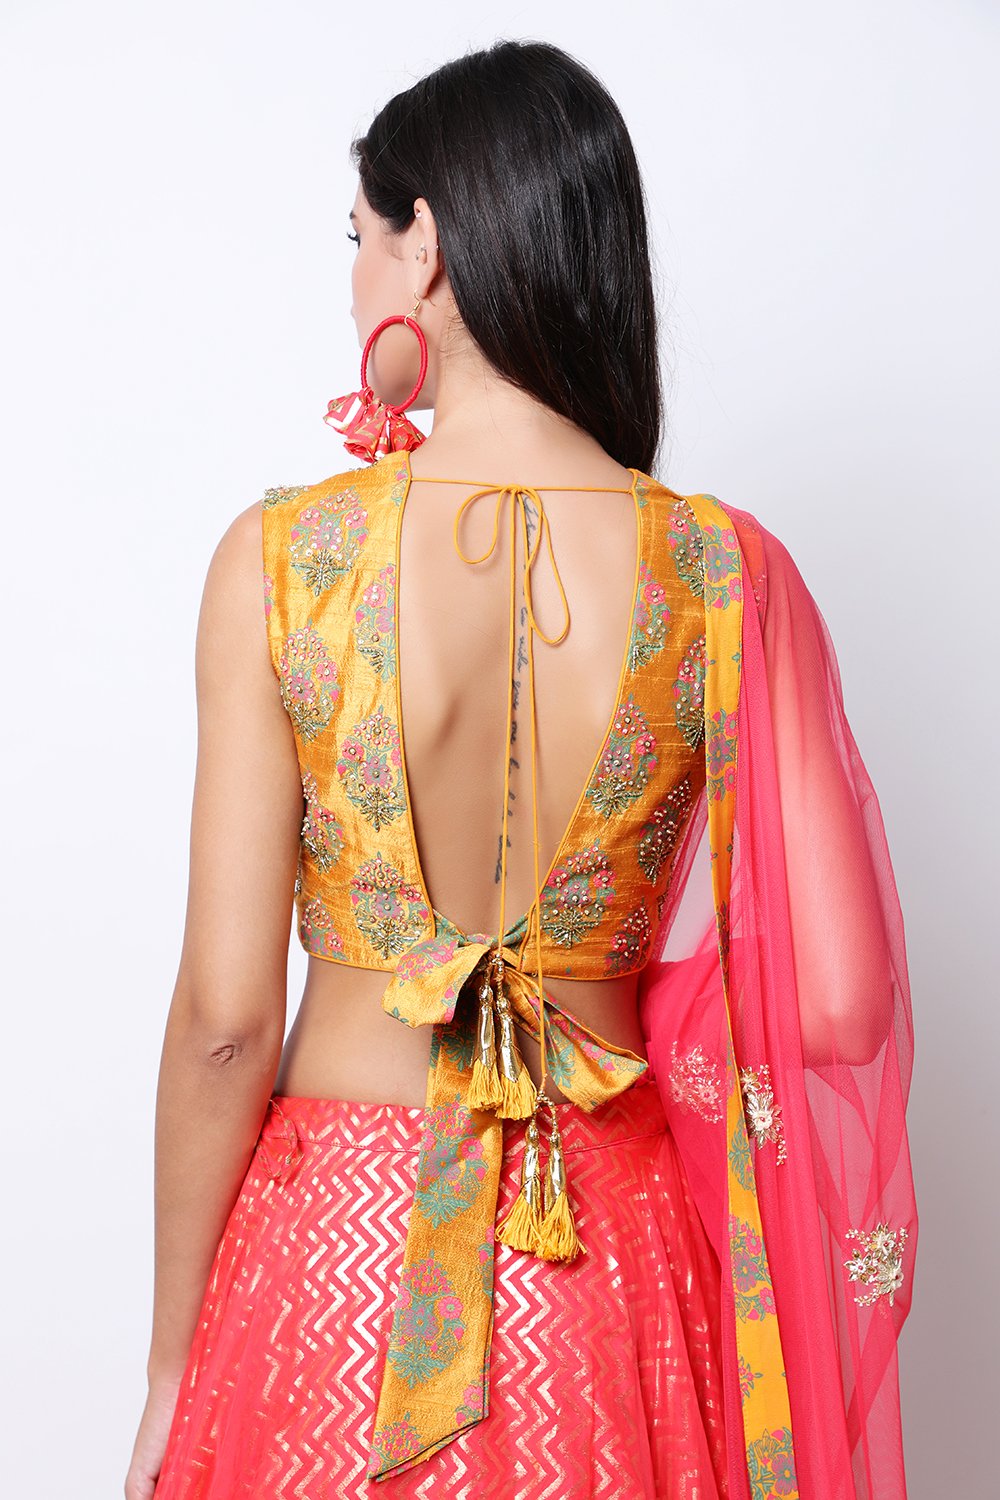 Ochre hand-printed blouse with printed organza top layer skirt with ochre border and dupatta.